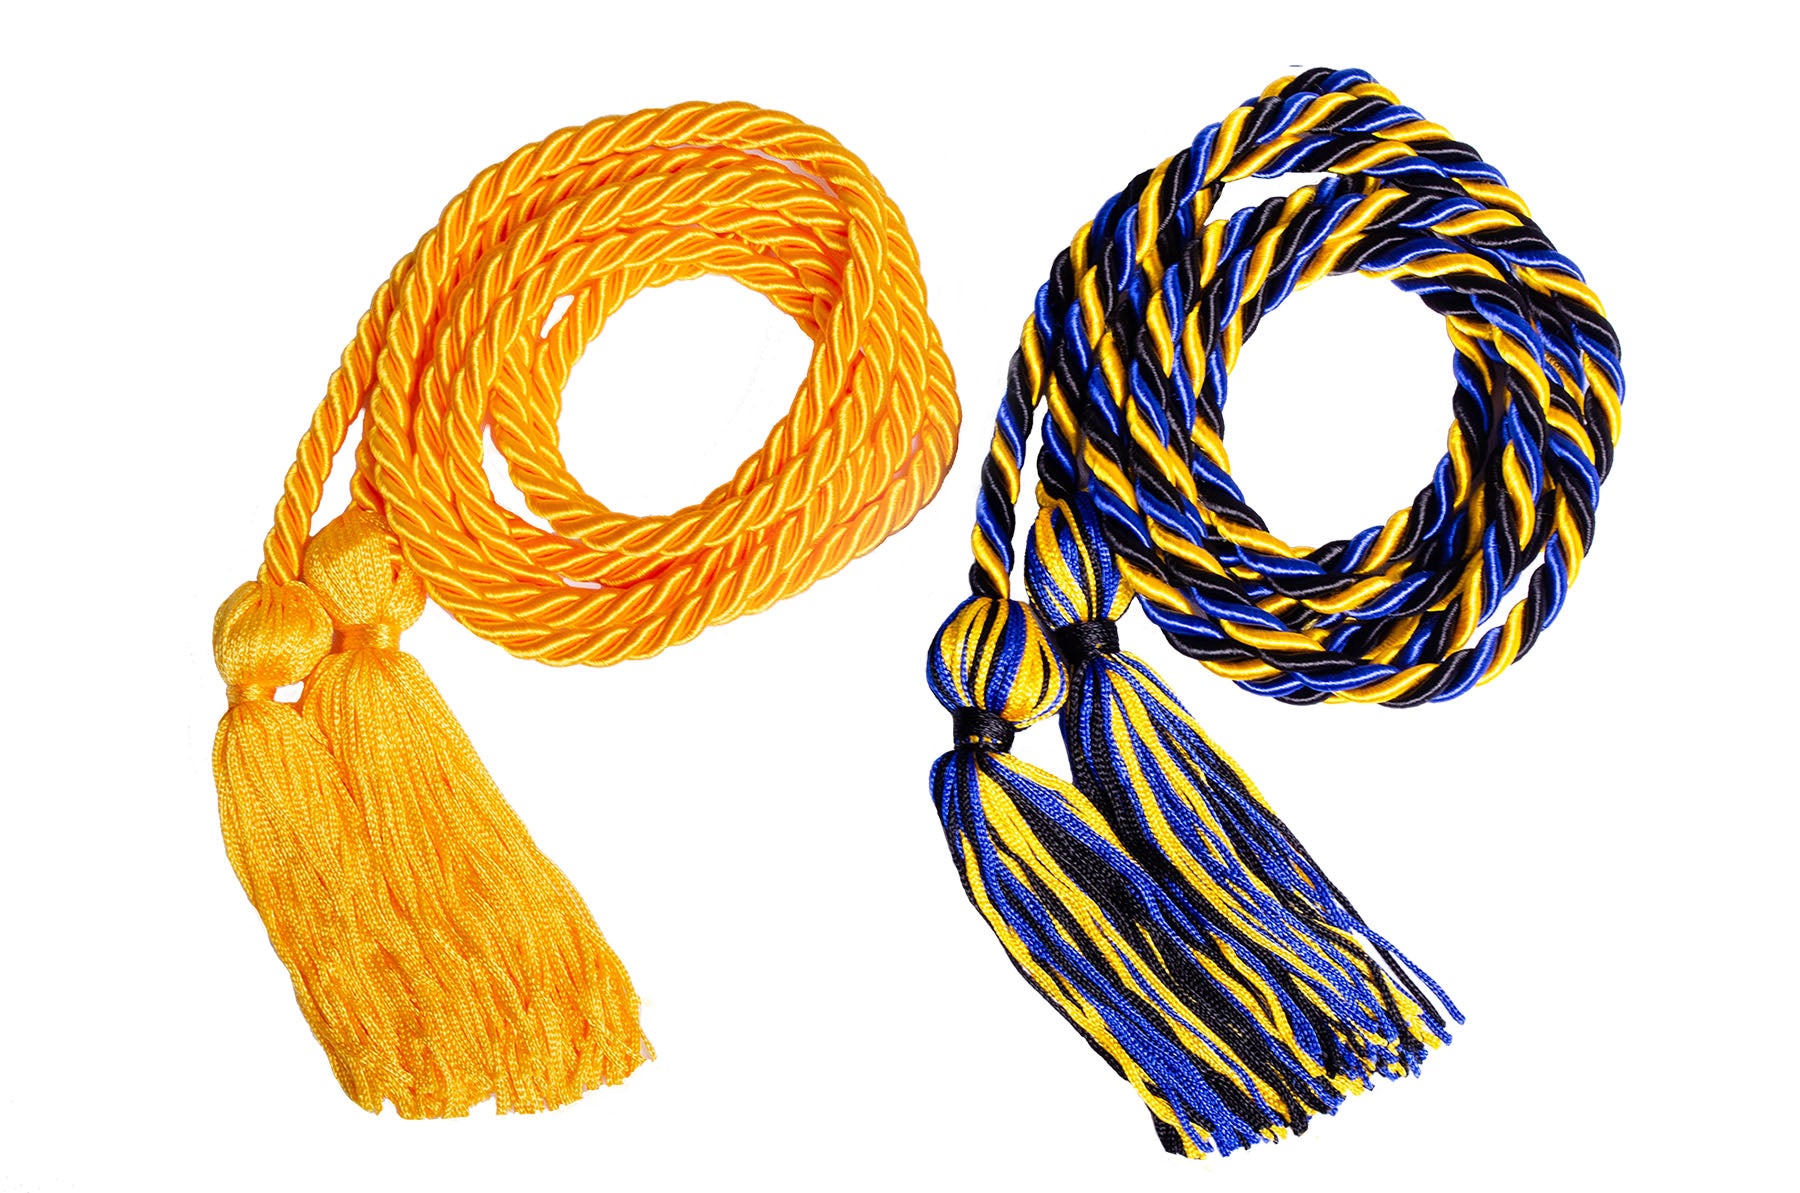 Gold Honor Cord  Cap and Gown Direct